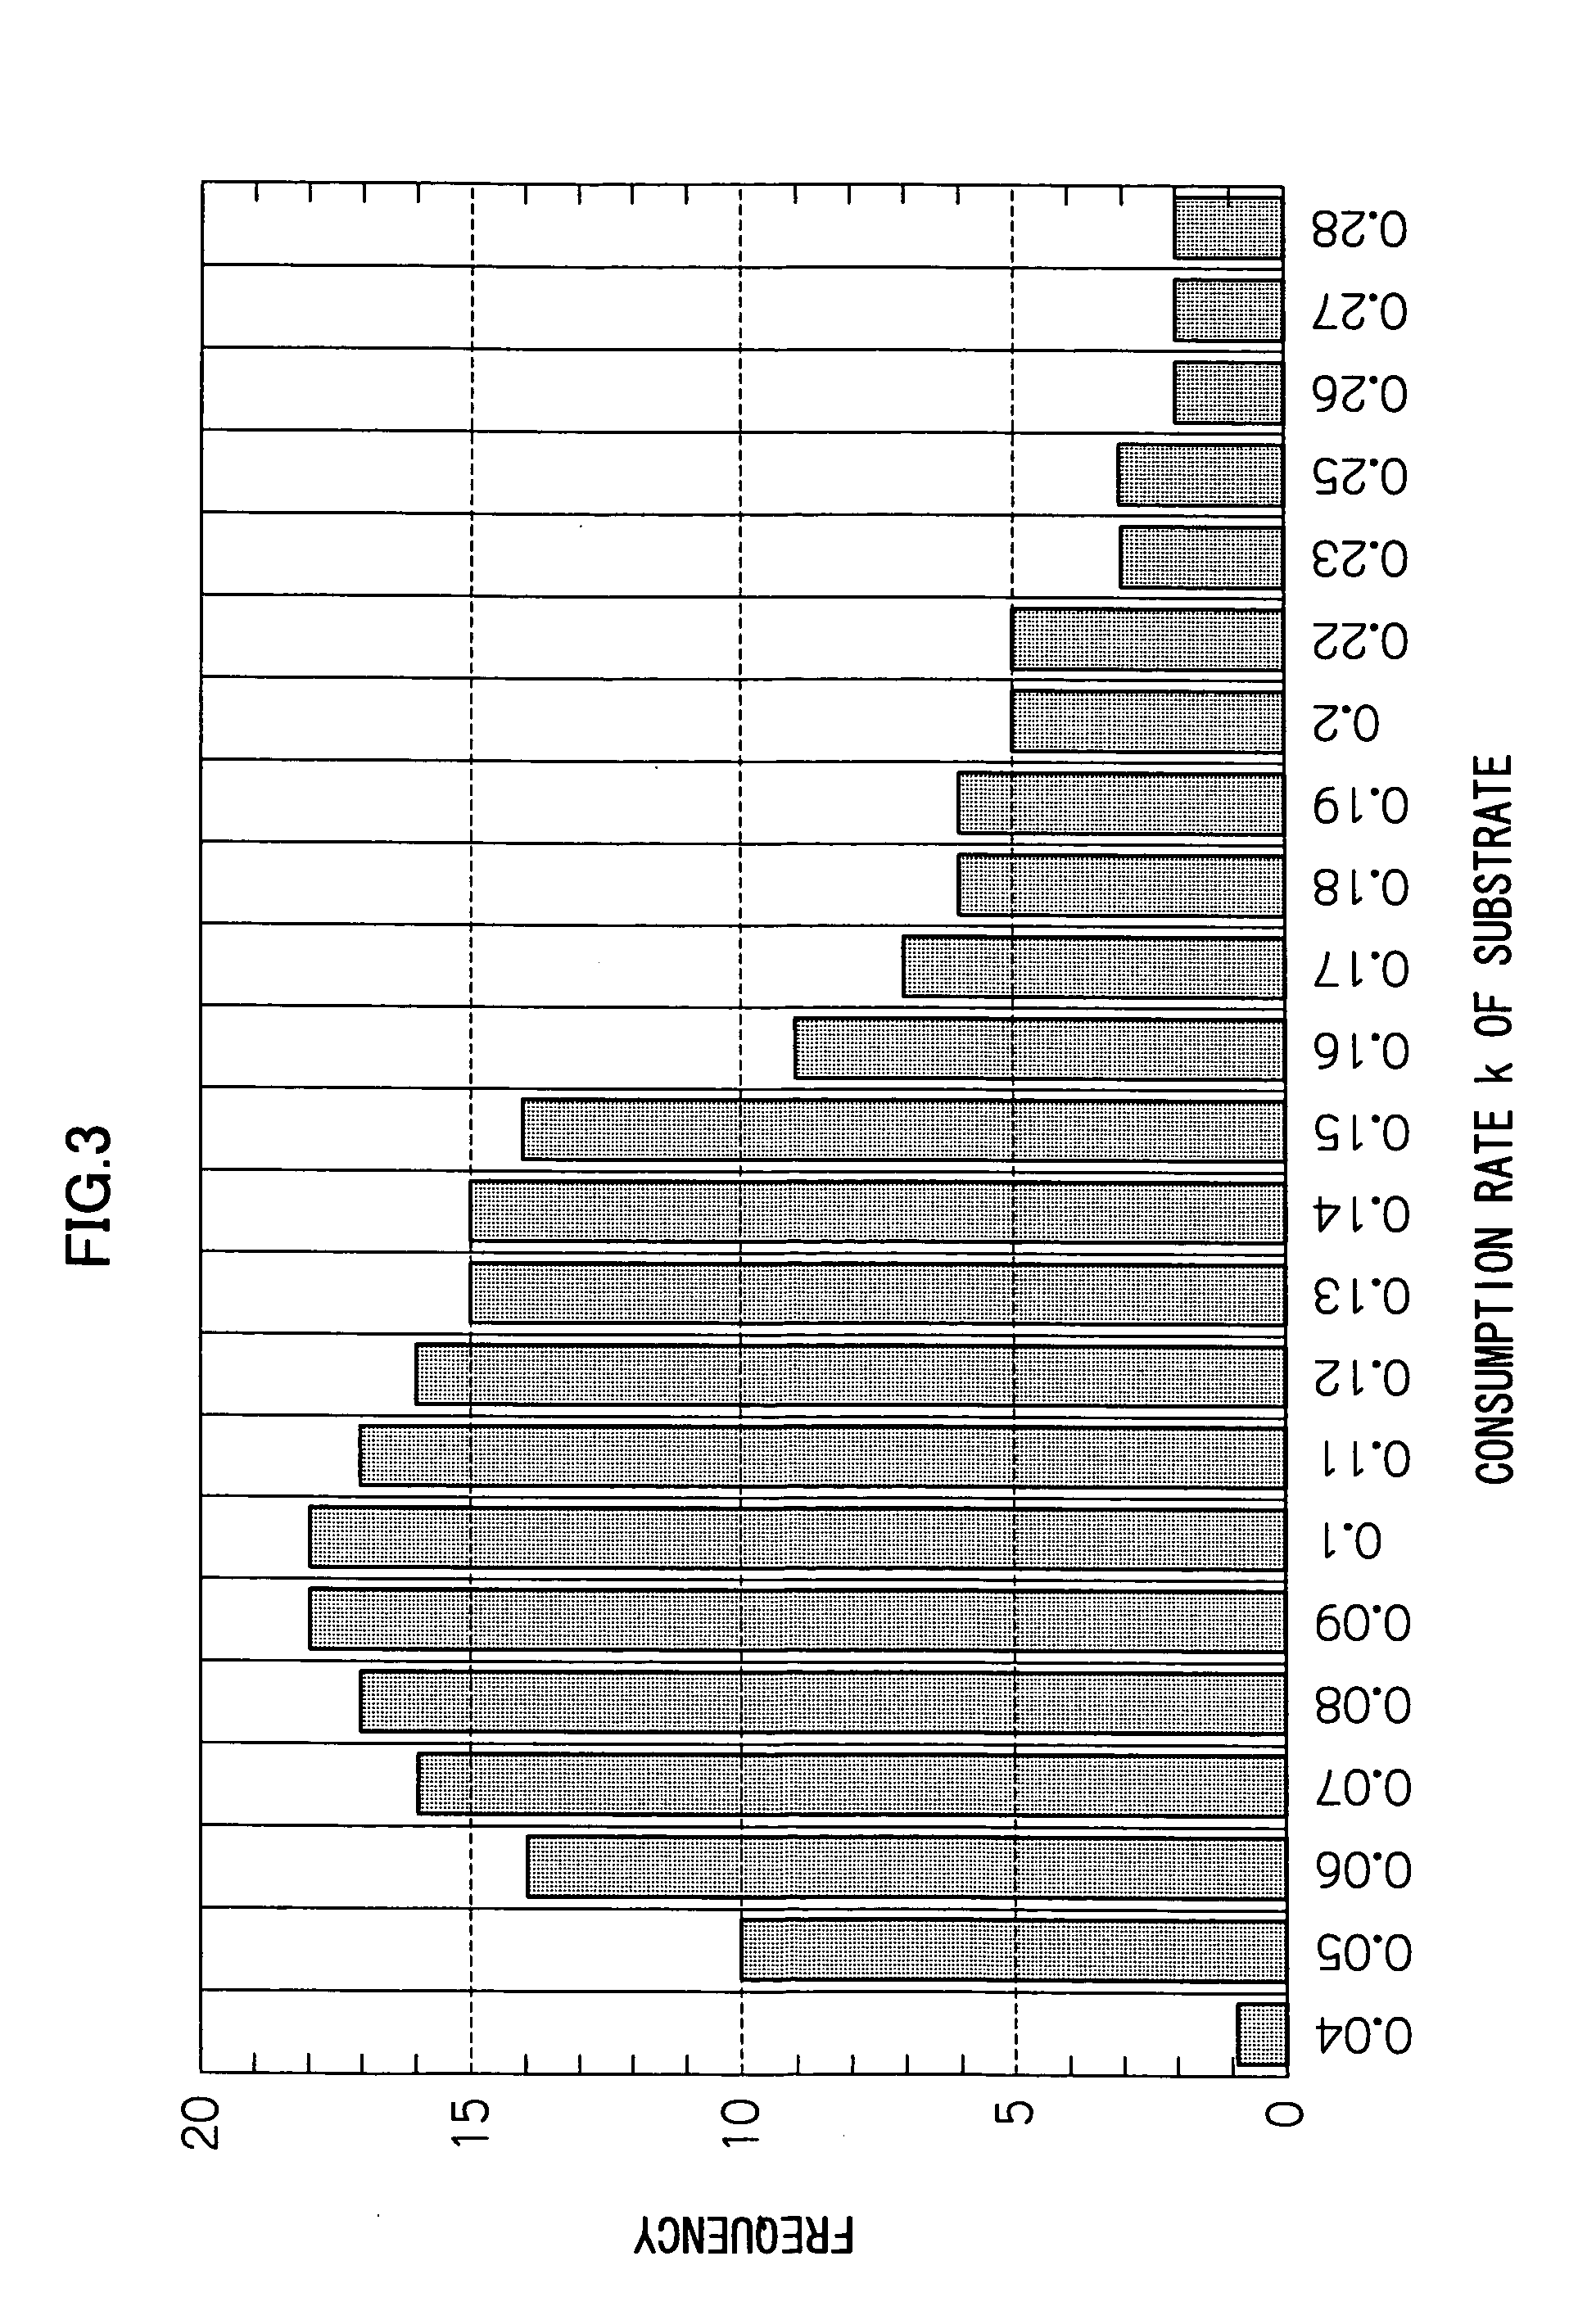 Method and equipment for cultivating anaerobic ammonium-oxidizing bacteria